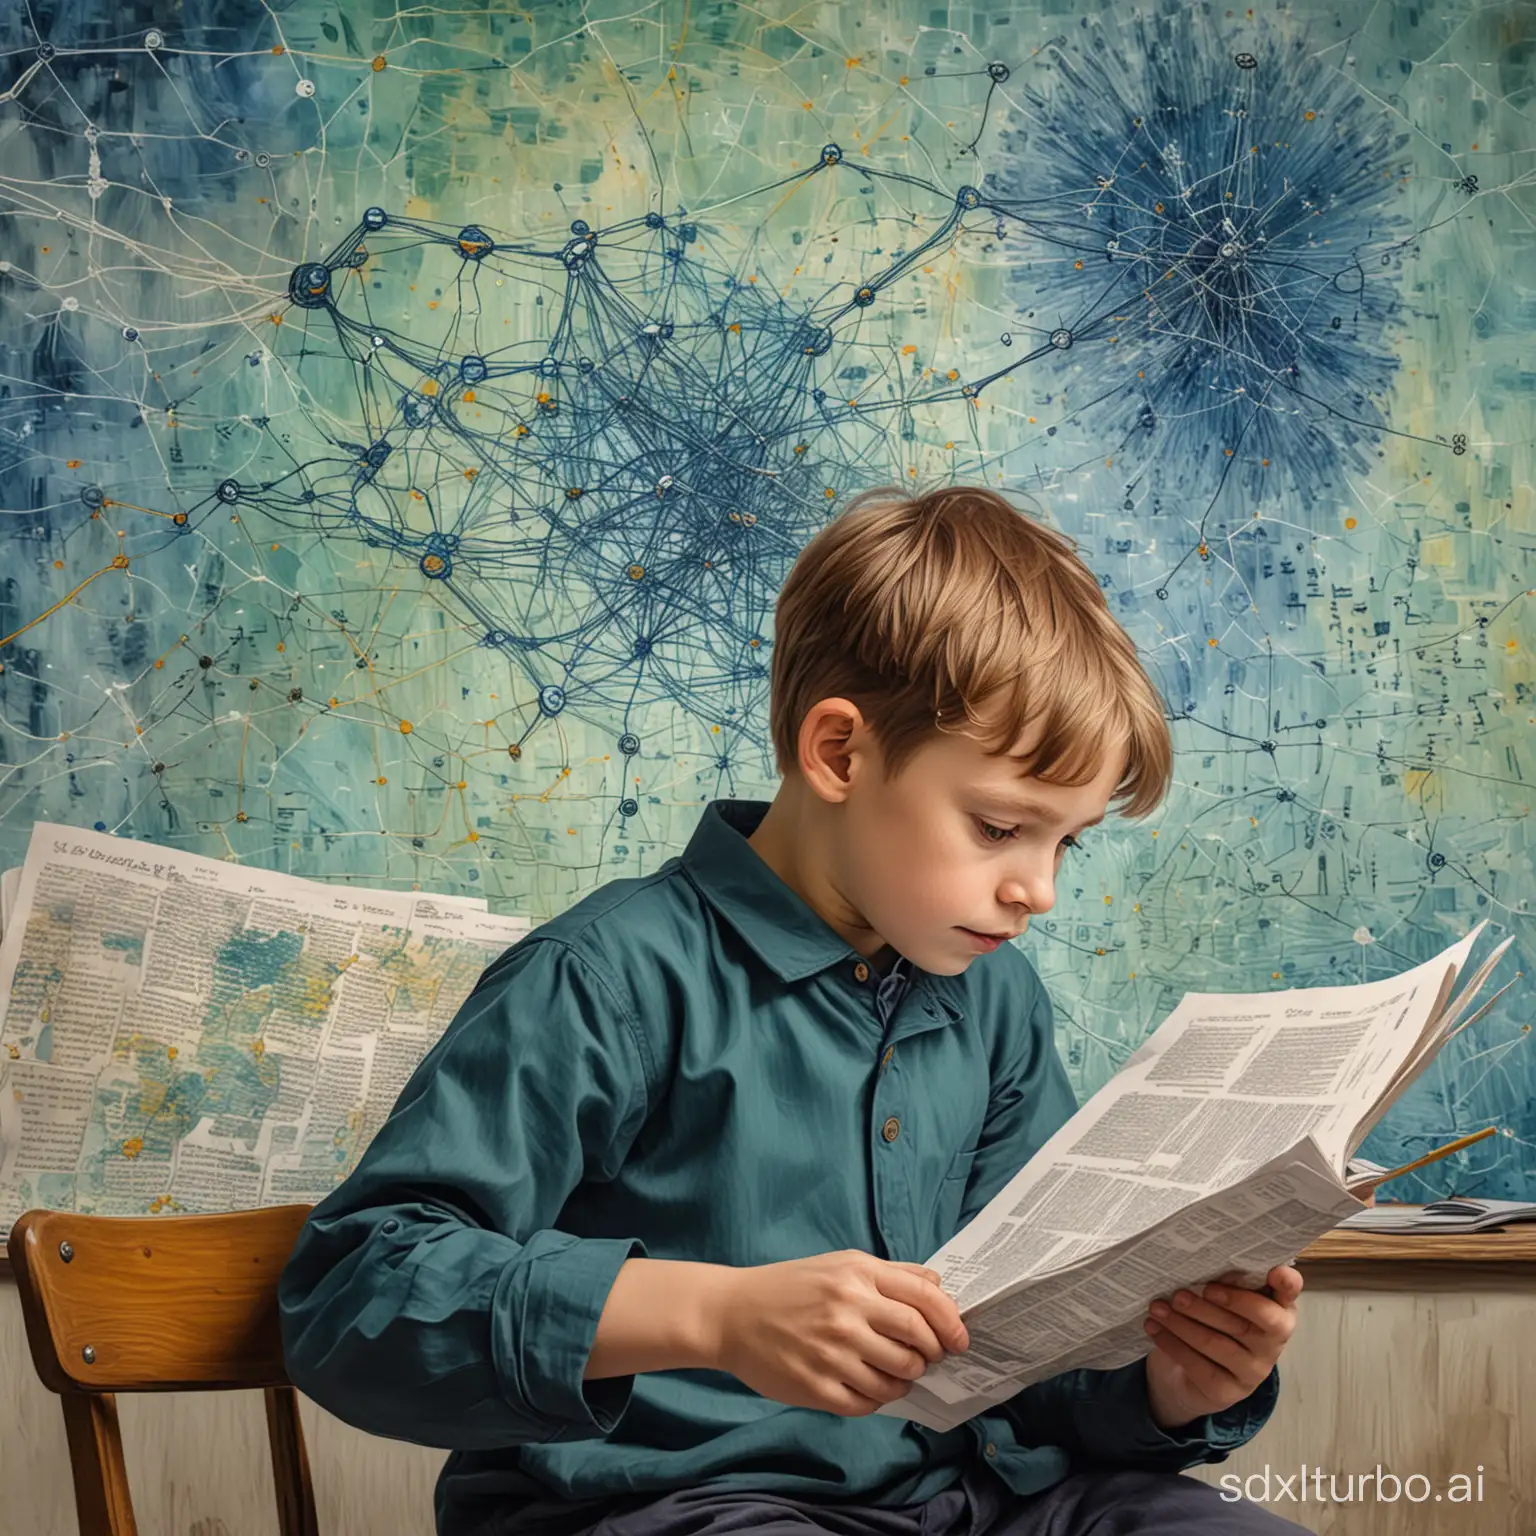 Curious-Child-Exploring-Science-Watercolor-Painting-with-Neural-Network-Motif